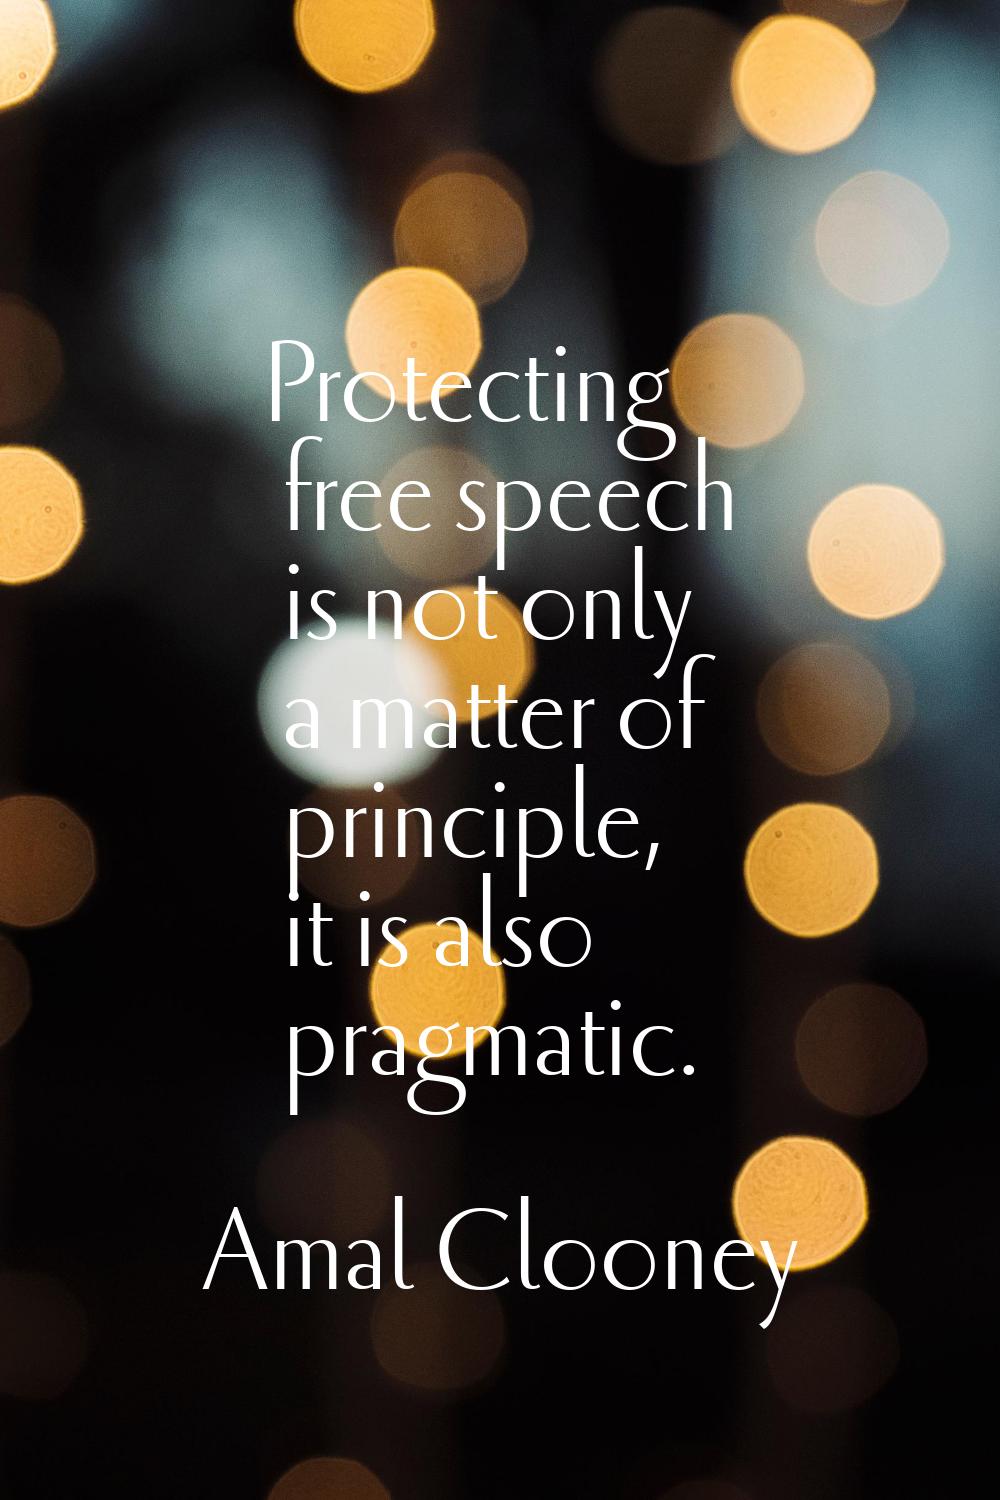 Protecting free speech is not only a matter of principle, it is also pragmatic.